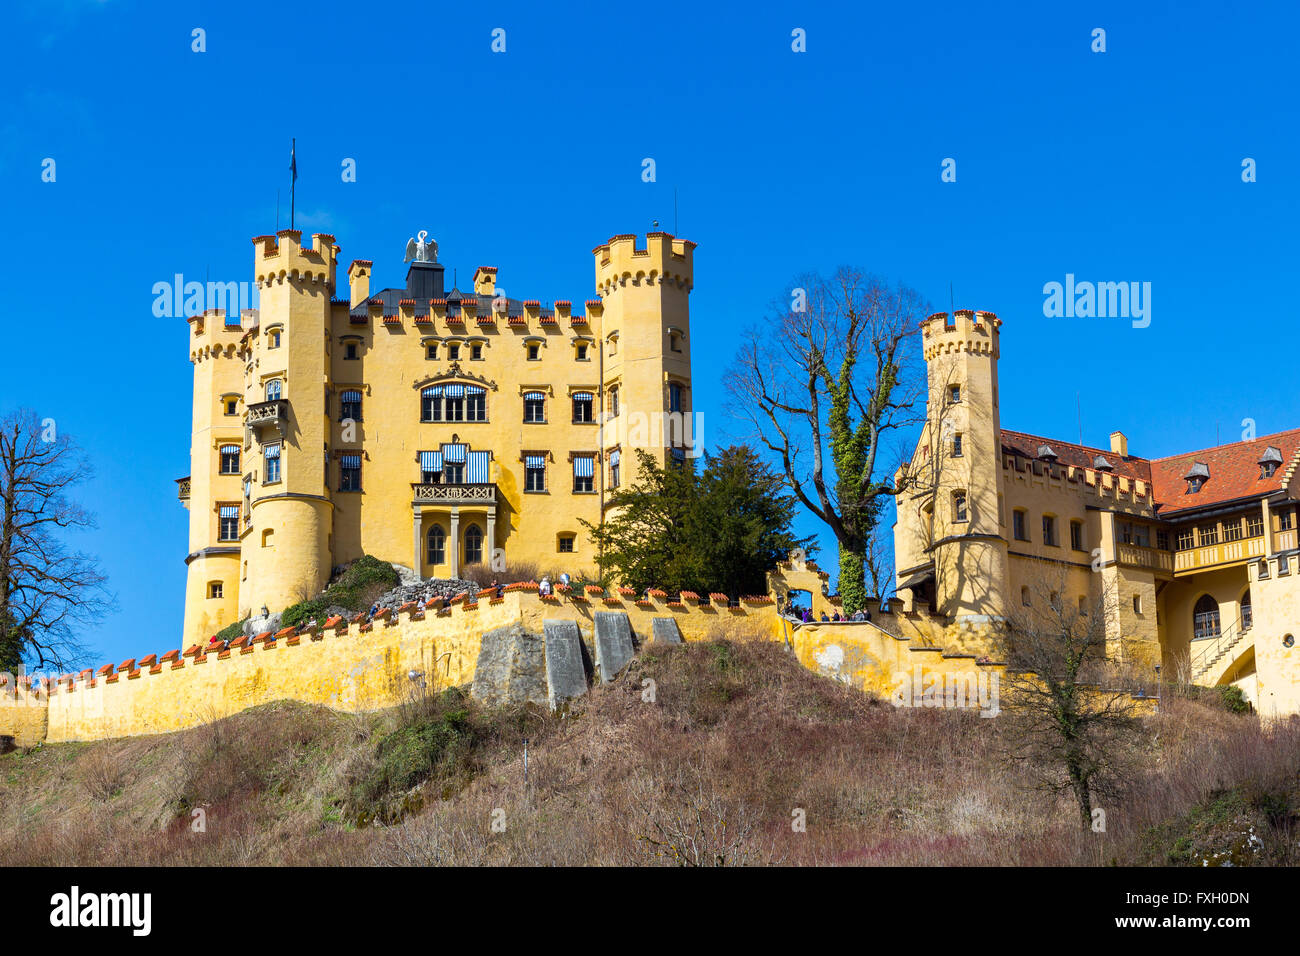 The castle of Hohenschwangau in Germany. Bavaria Stock Photo